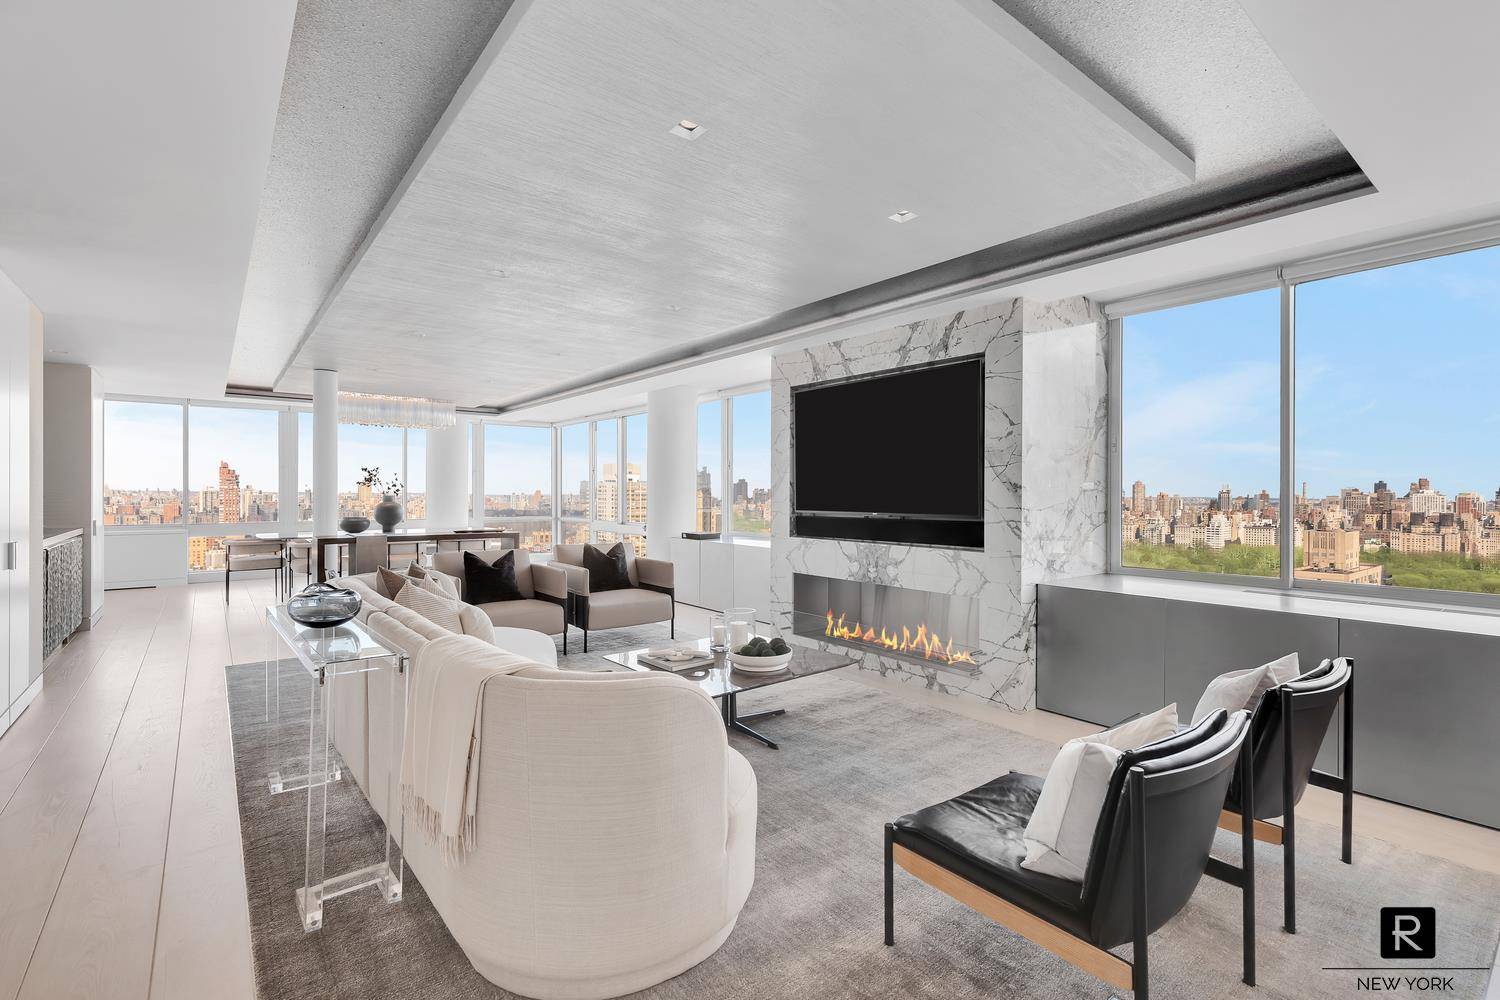 This stunning residence is the epitome of holistic living in New York City's most sought after address, nestled in Lincoln Square's prestigious building just steps from Central Park.